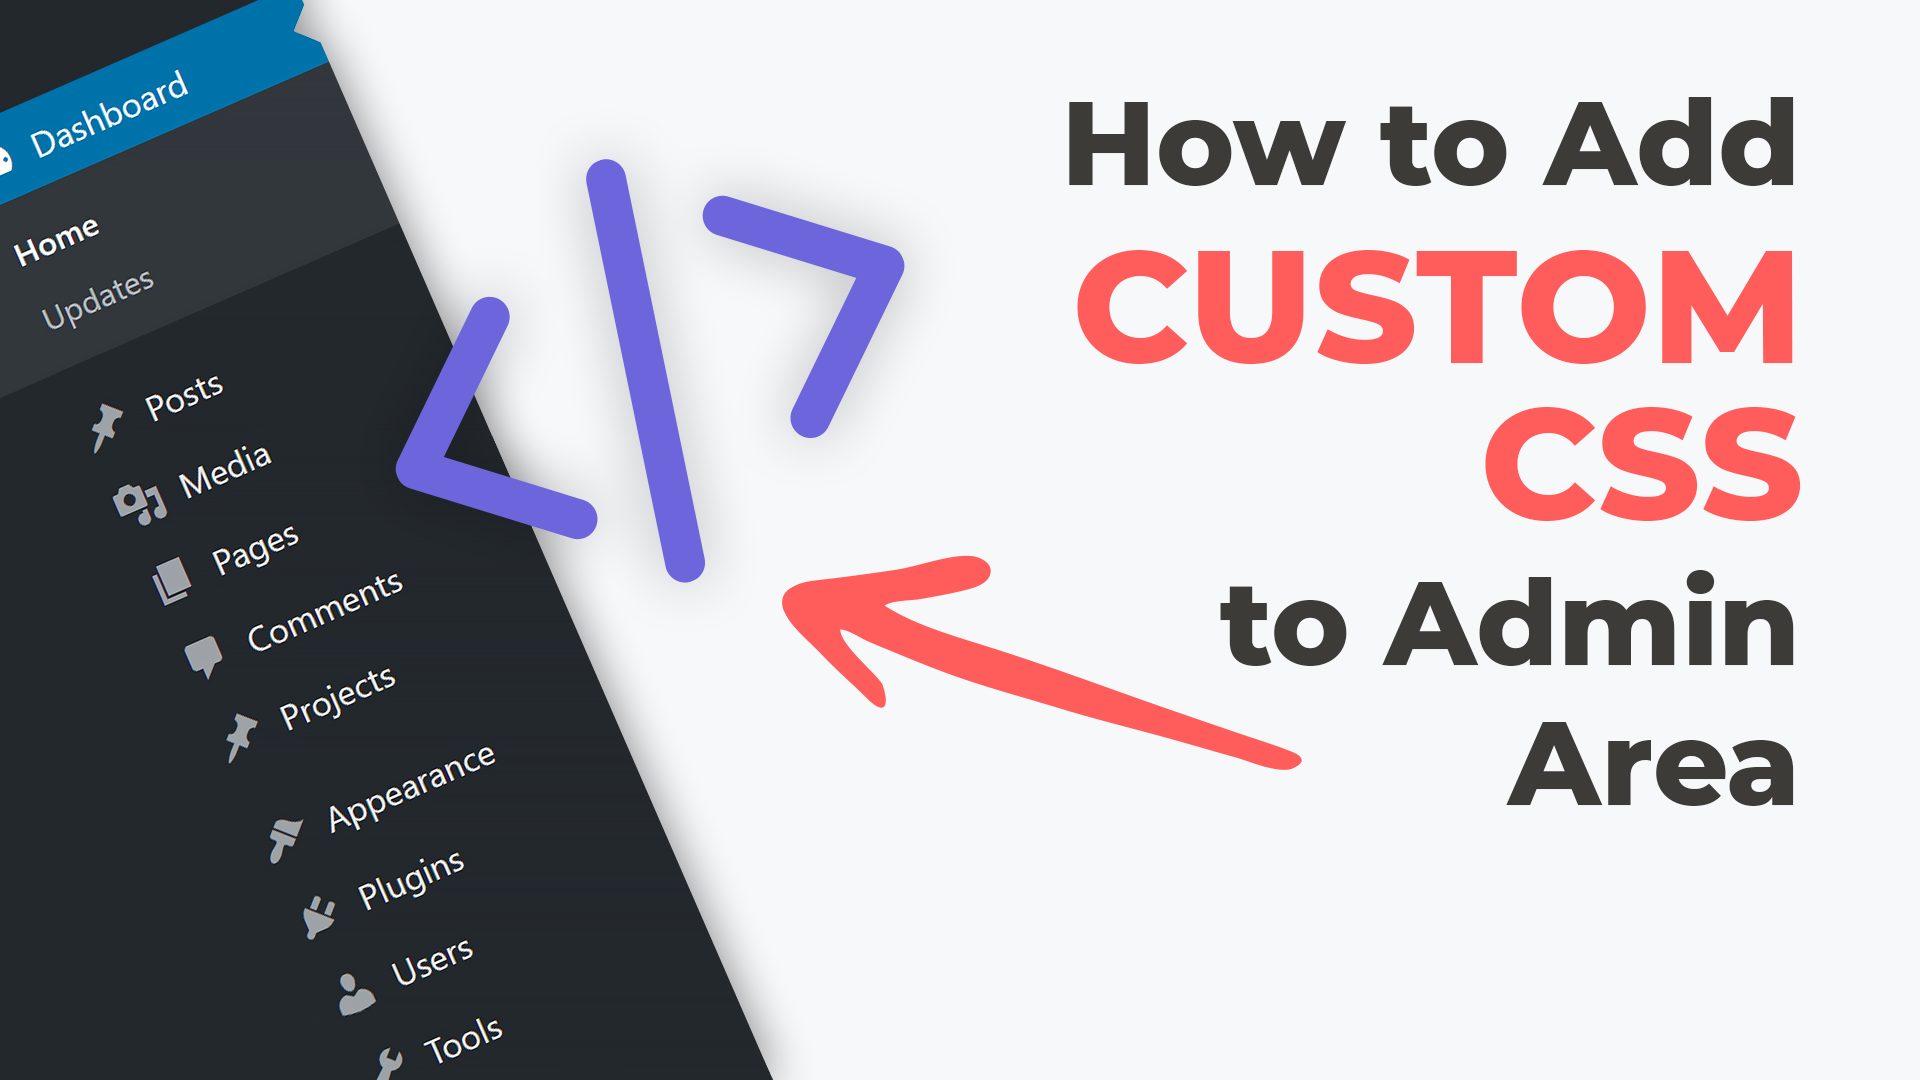 How to Add Custom CSS to Admin Area